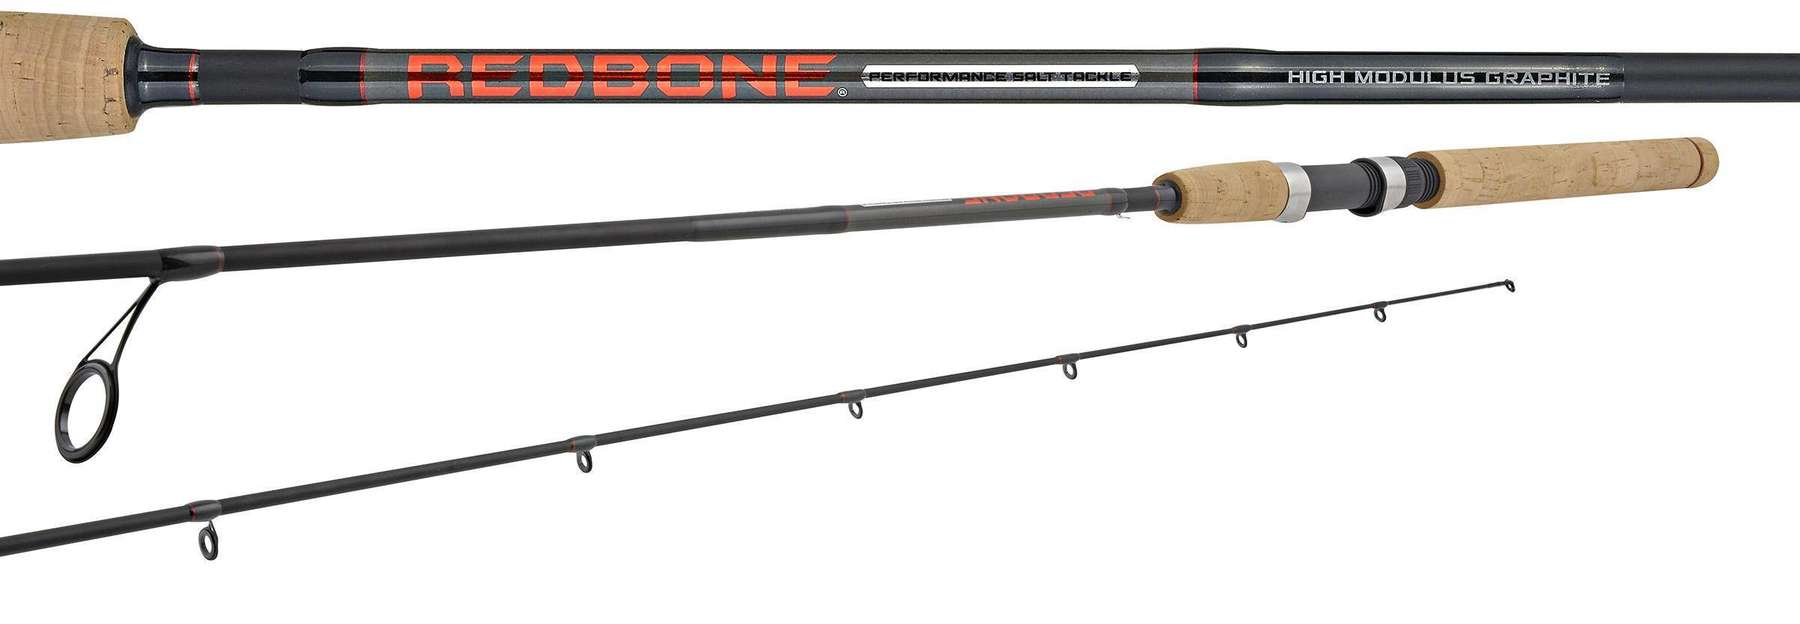 Hurricane Redbone 8' 1 Piece Medium Spin Rod 10-20 Pounds - Ideal For  Fishing